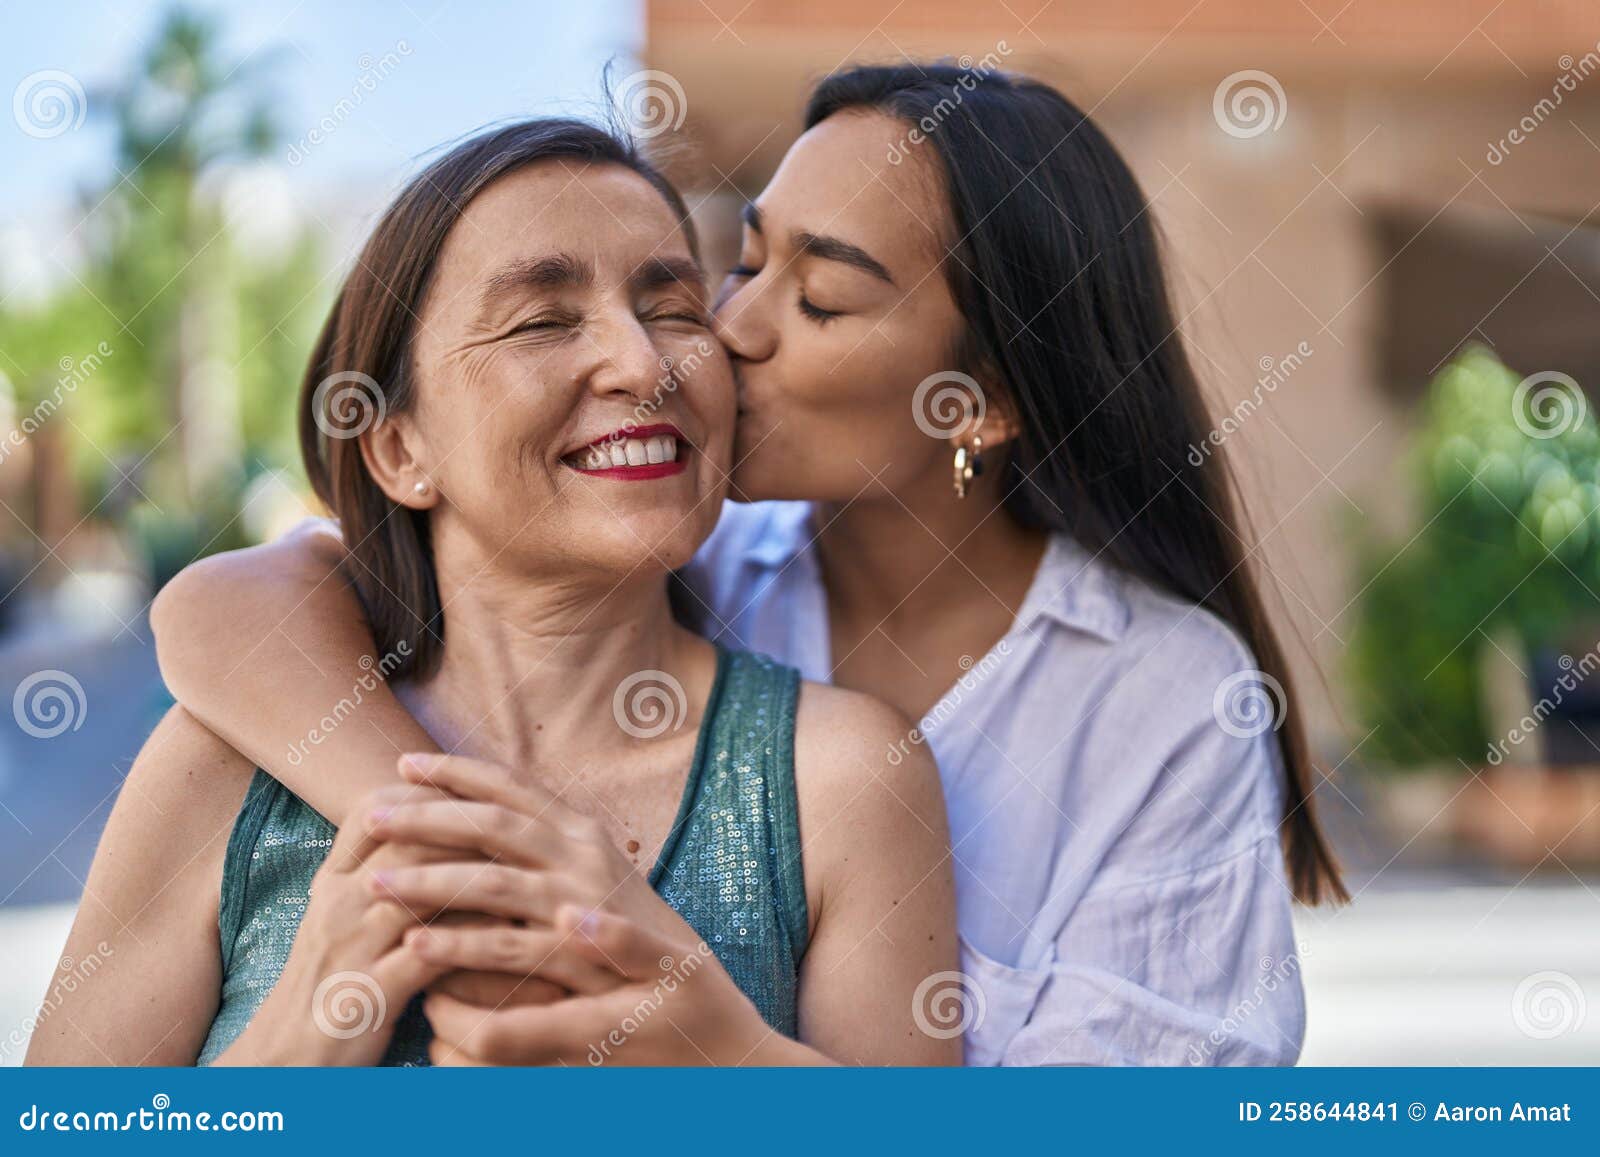 Two Women Mother And Daughter Hugging Each Other Kissing At Street